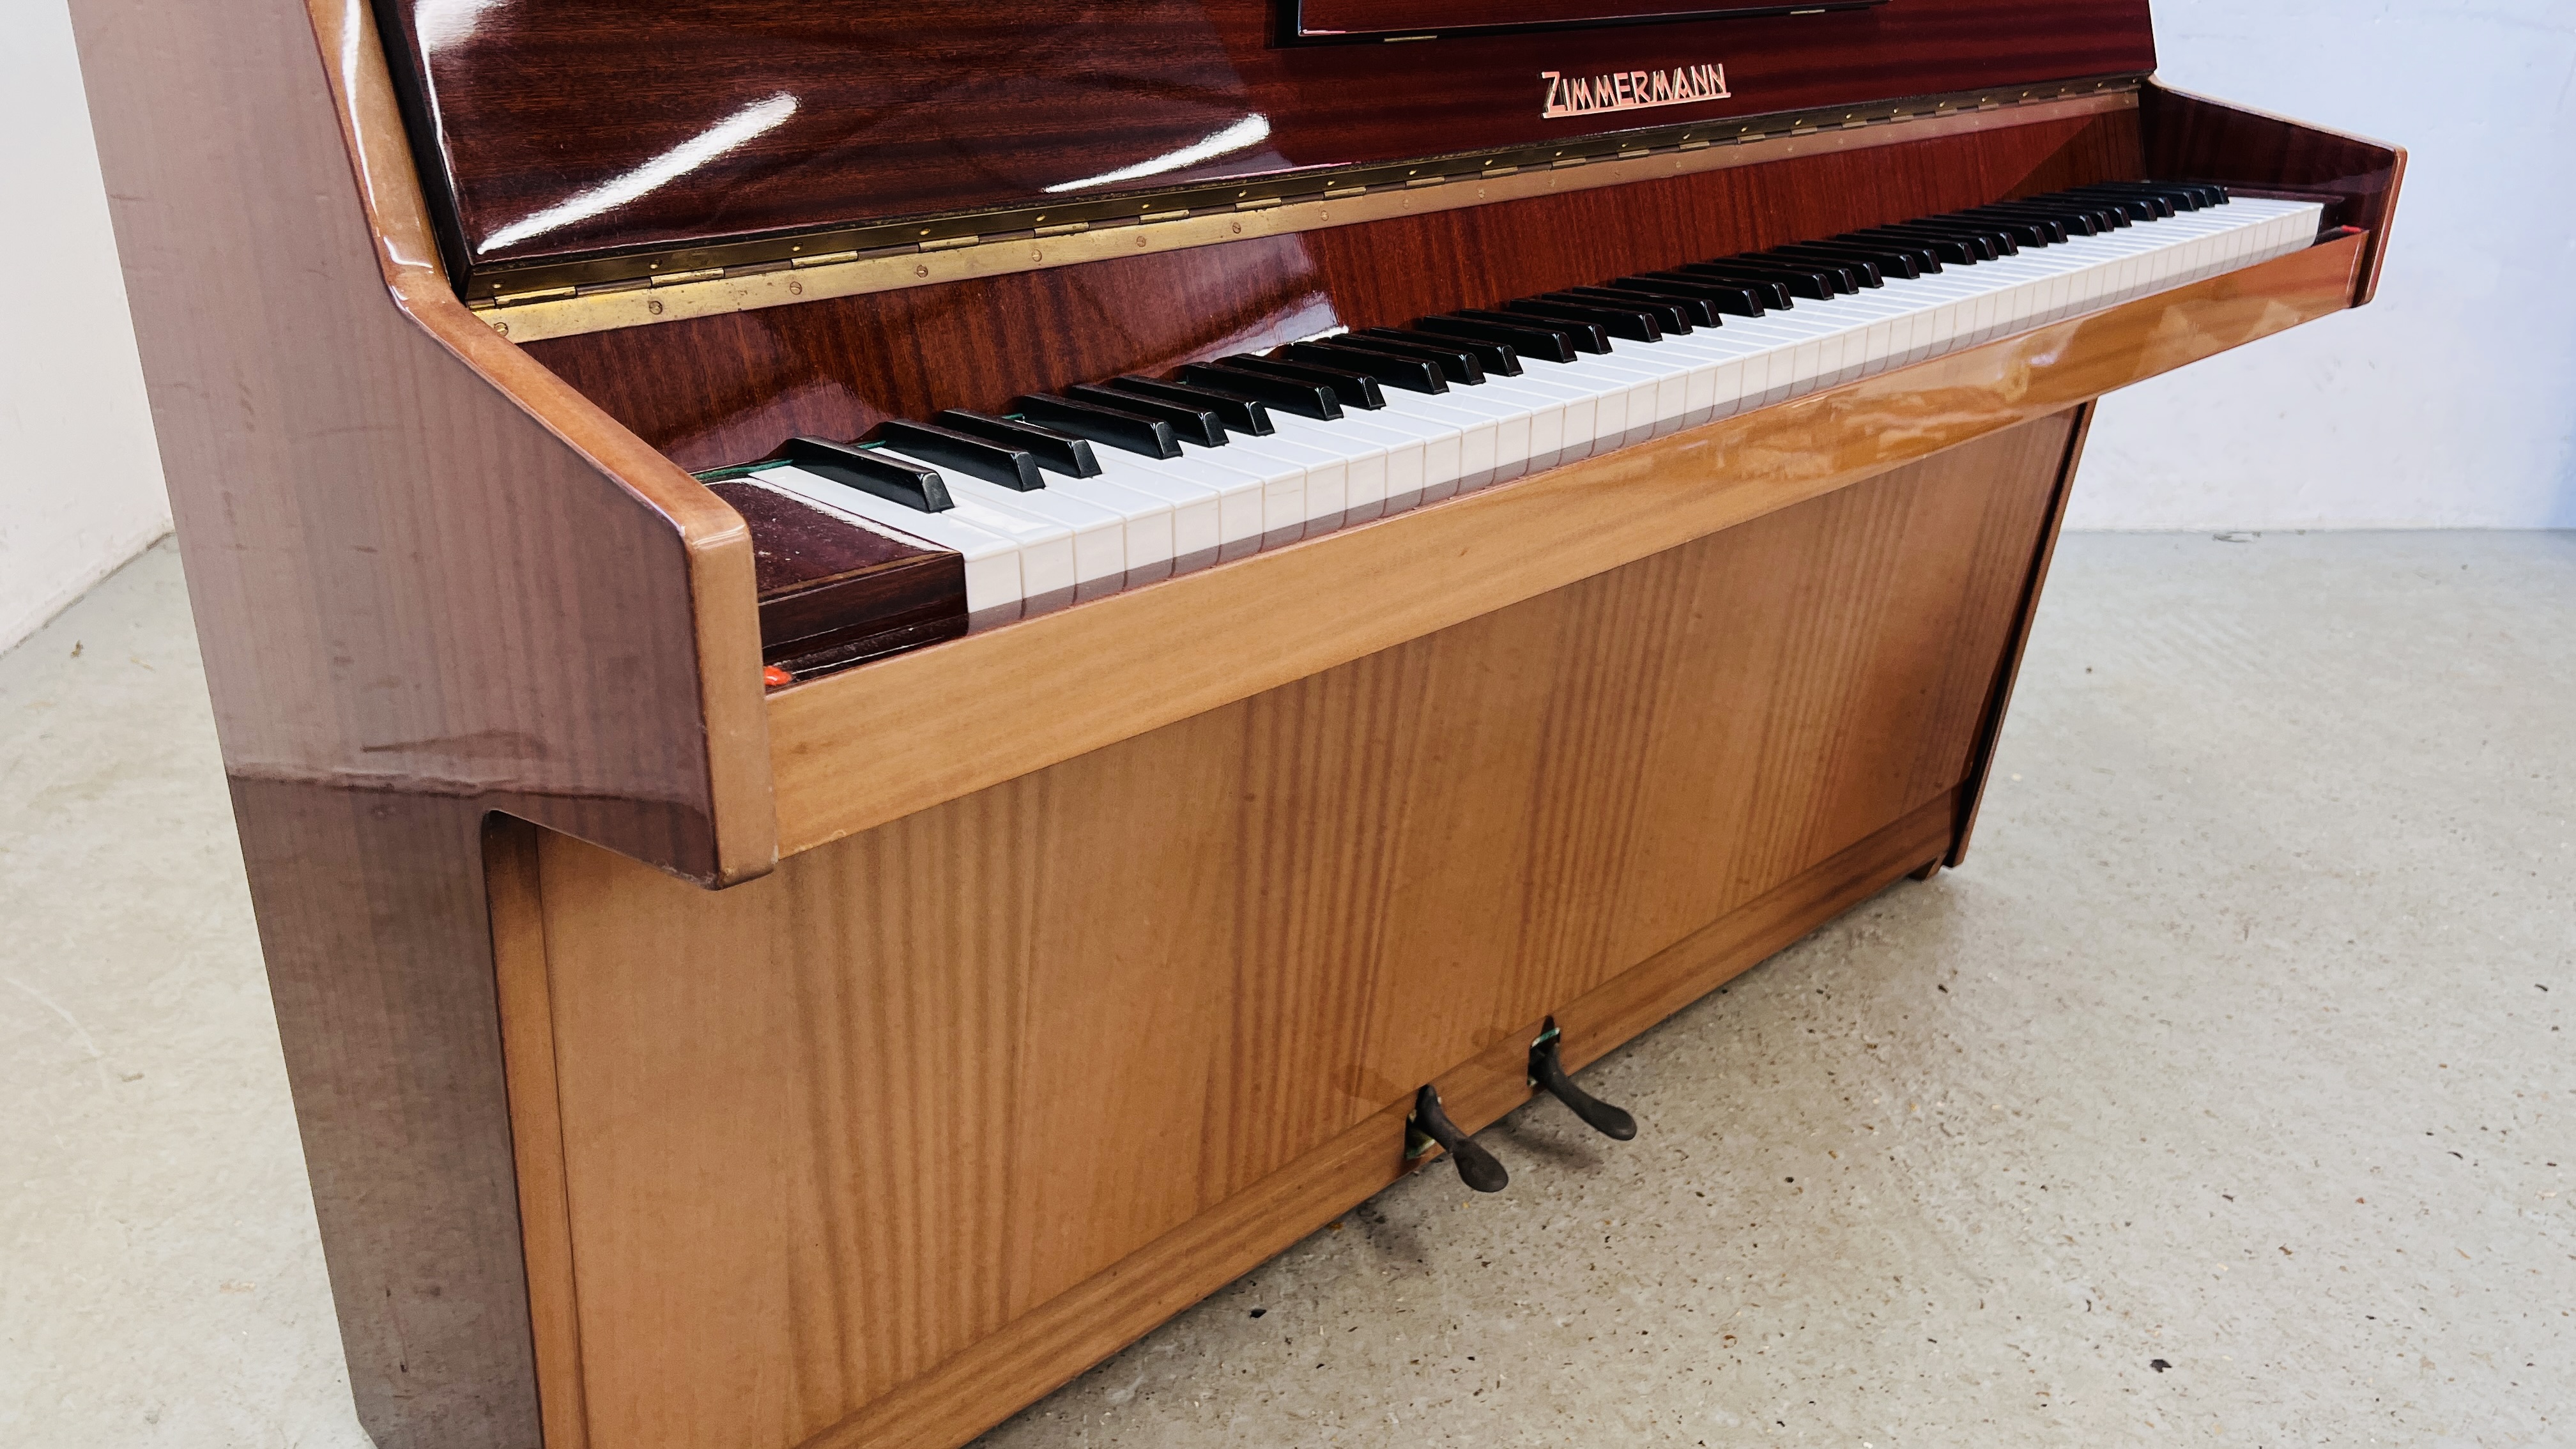 A ZIMMERMAN UPRIGHT PIANO AND STOOL W 142CM X D 53CM X H 108CM - Image 11 of 20